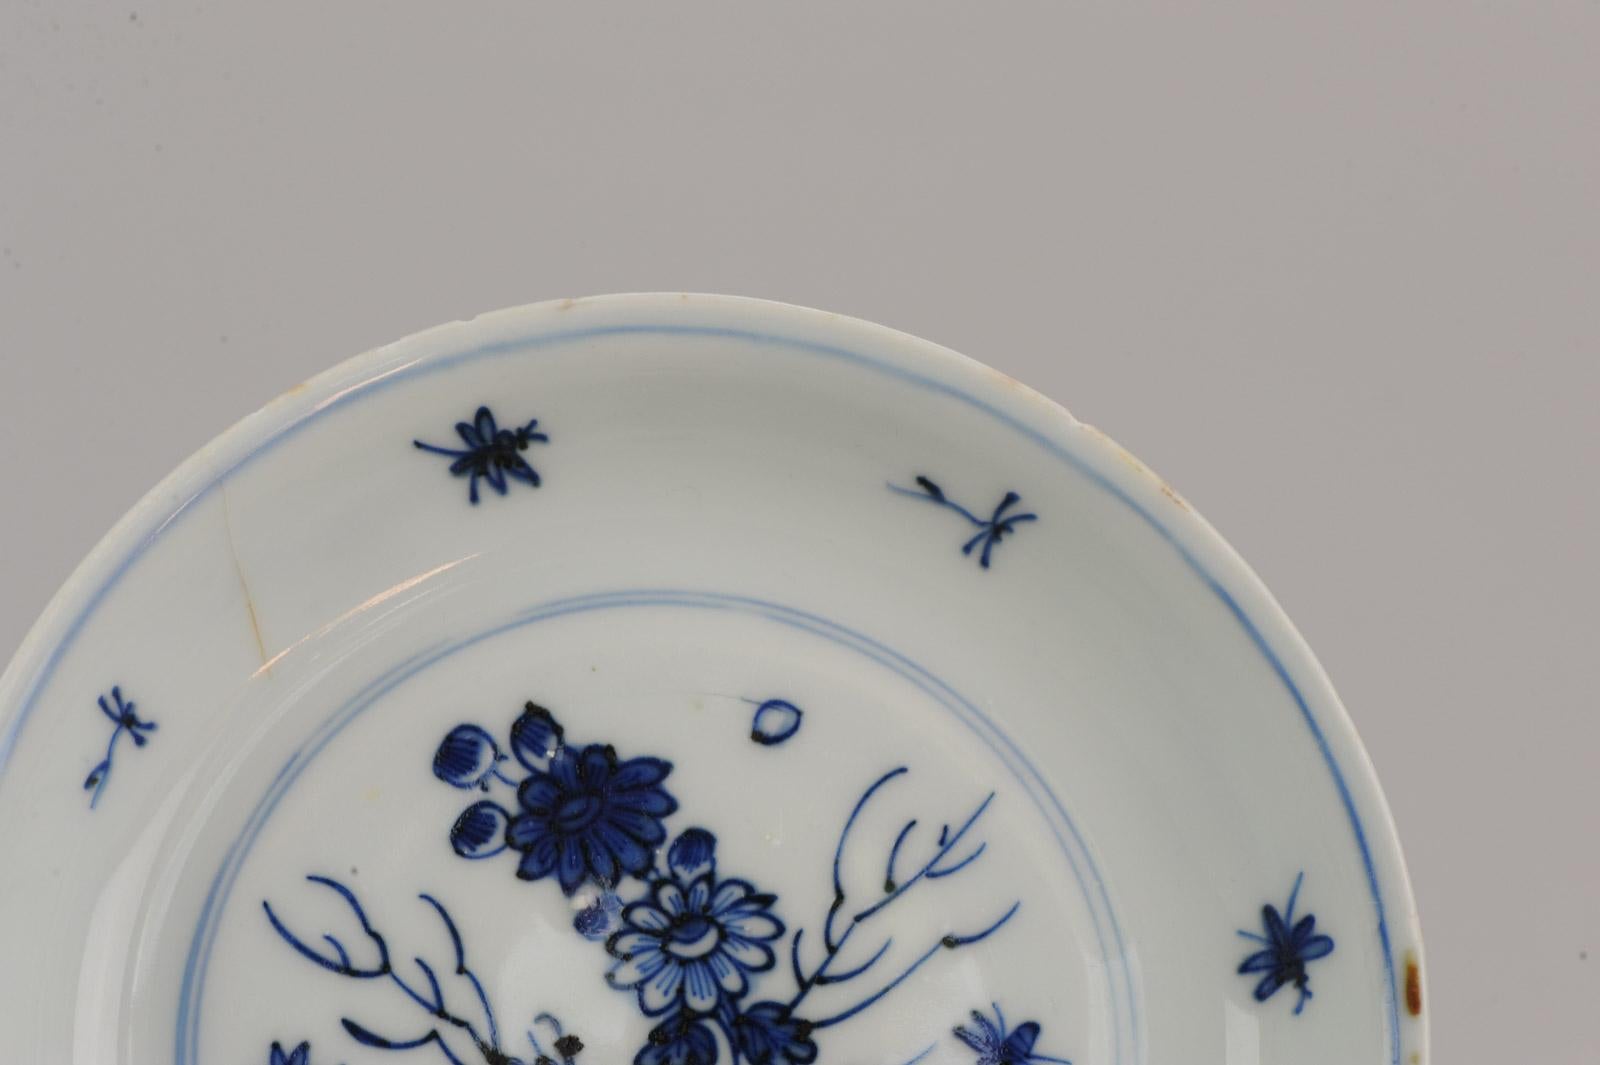 Antique Chinese Porcelain Plate 17th Century Ming Dynasty Tianqi/Chongzhen 4